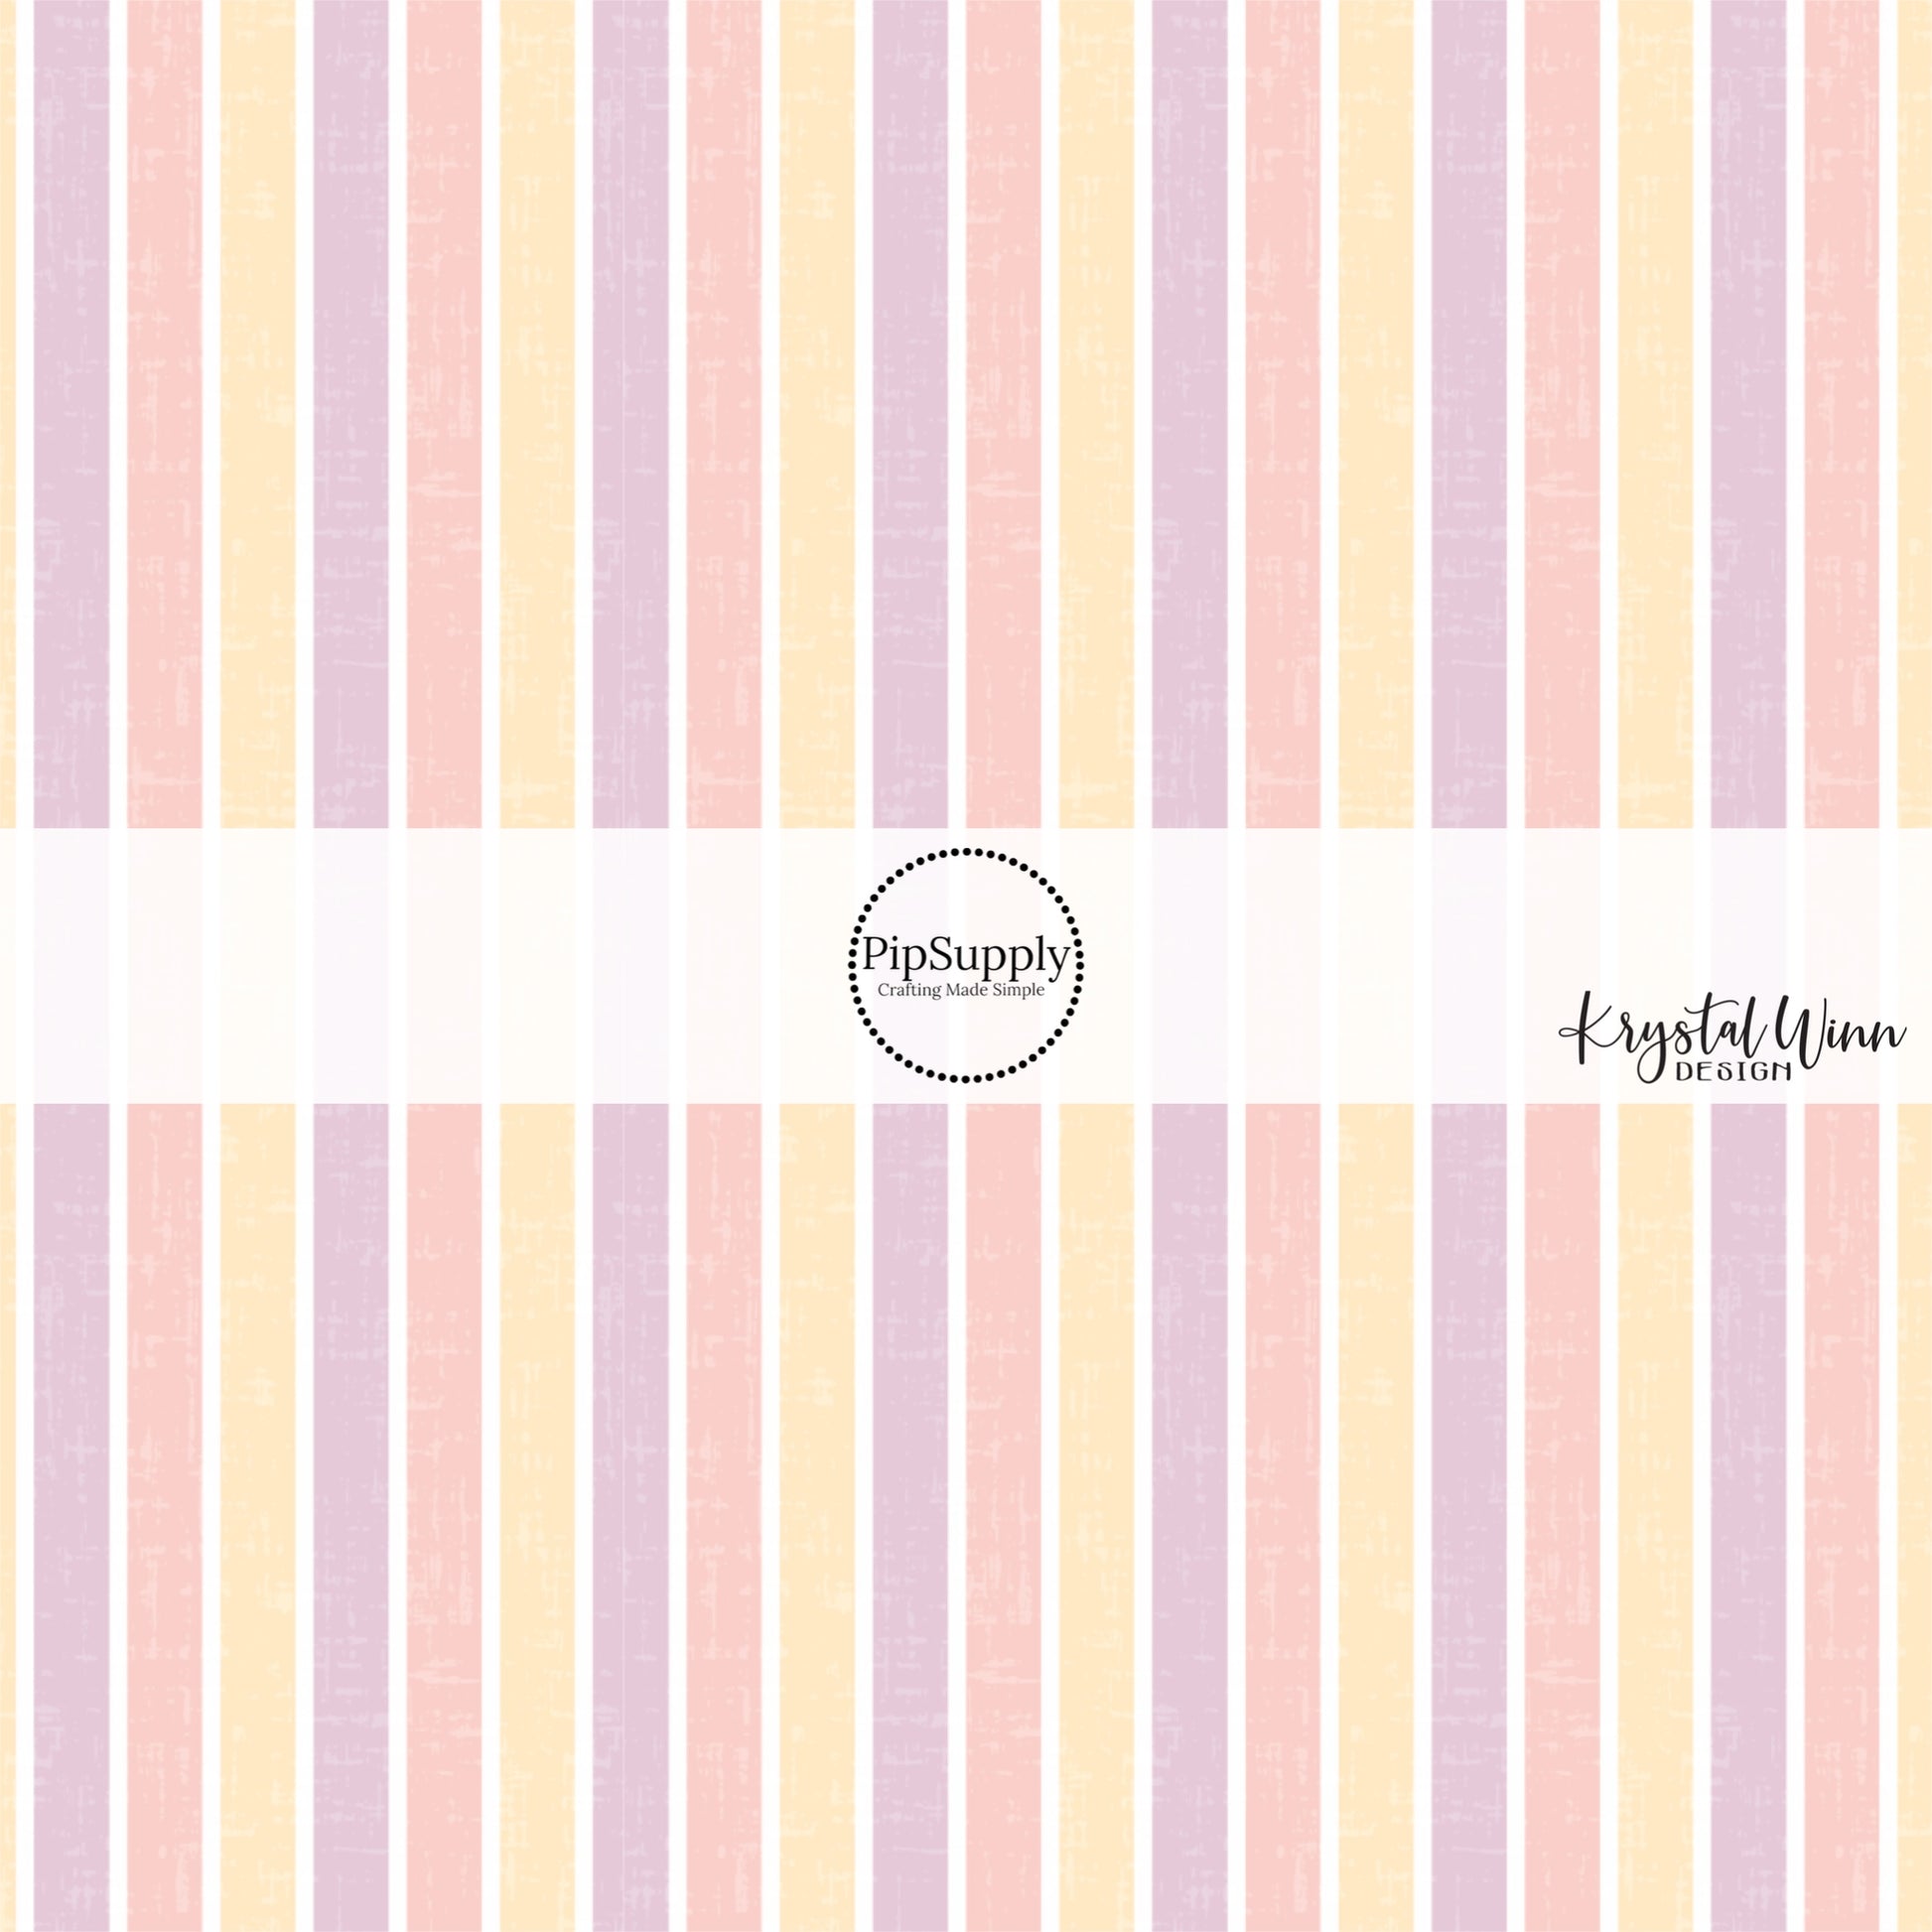 Distressed pastel lavender, pink, and light yellow alternating stripe bow strips